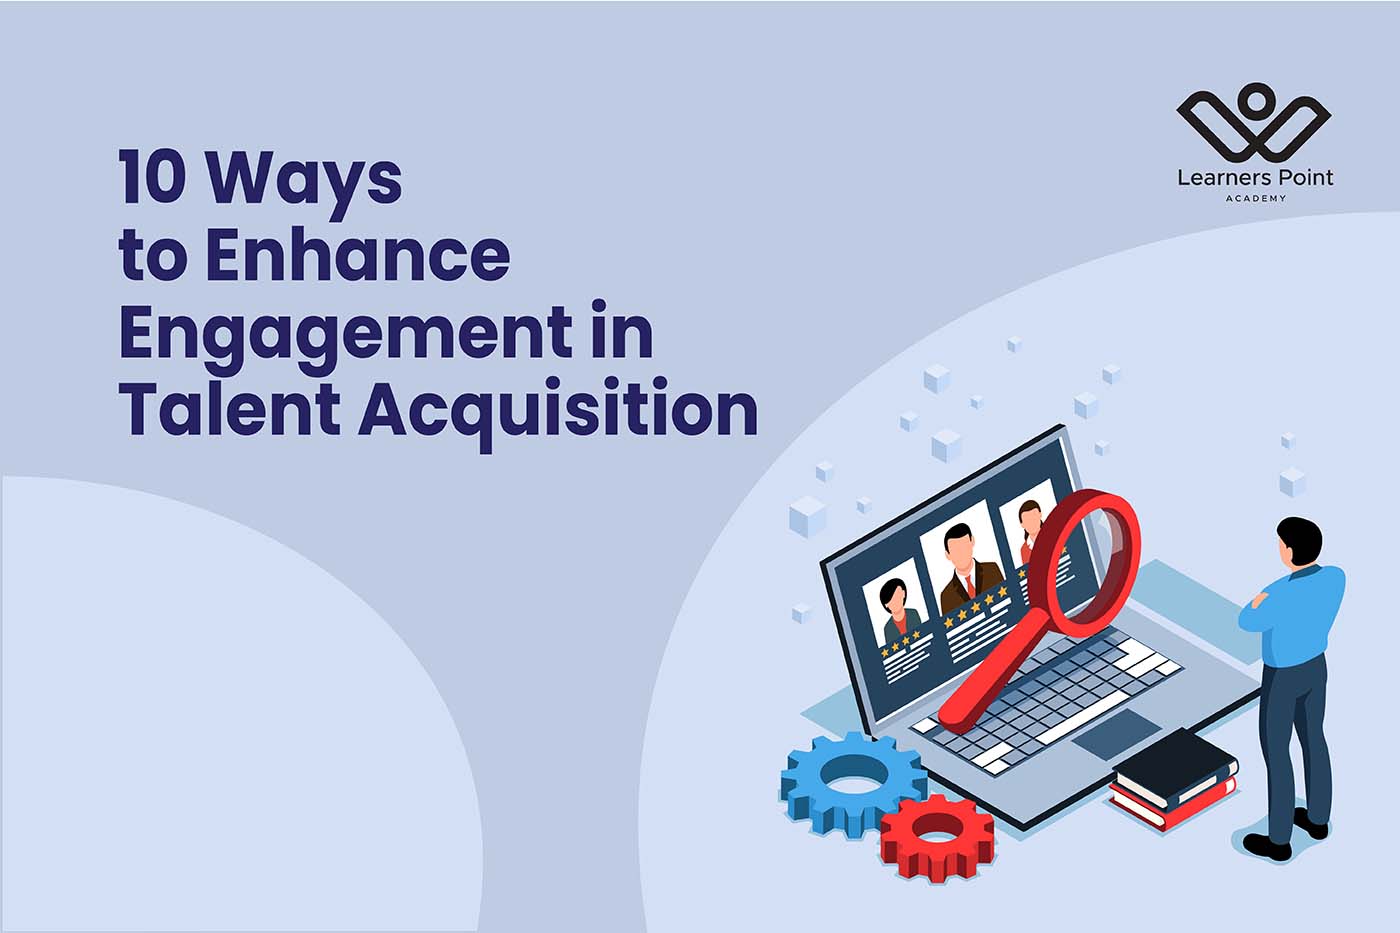 10 Ways to Enhance Engagement in Talent Acquisition